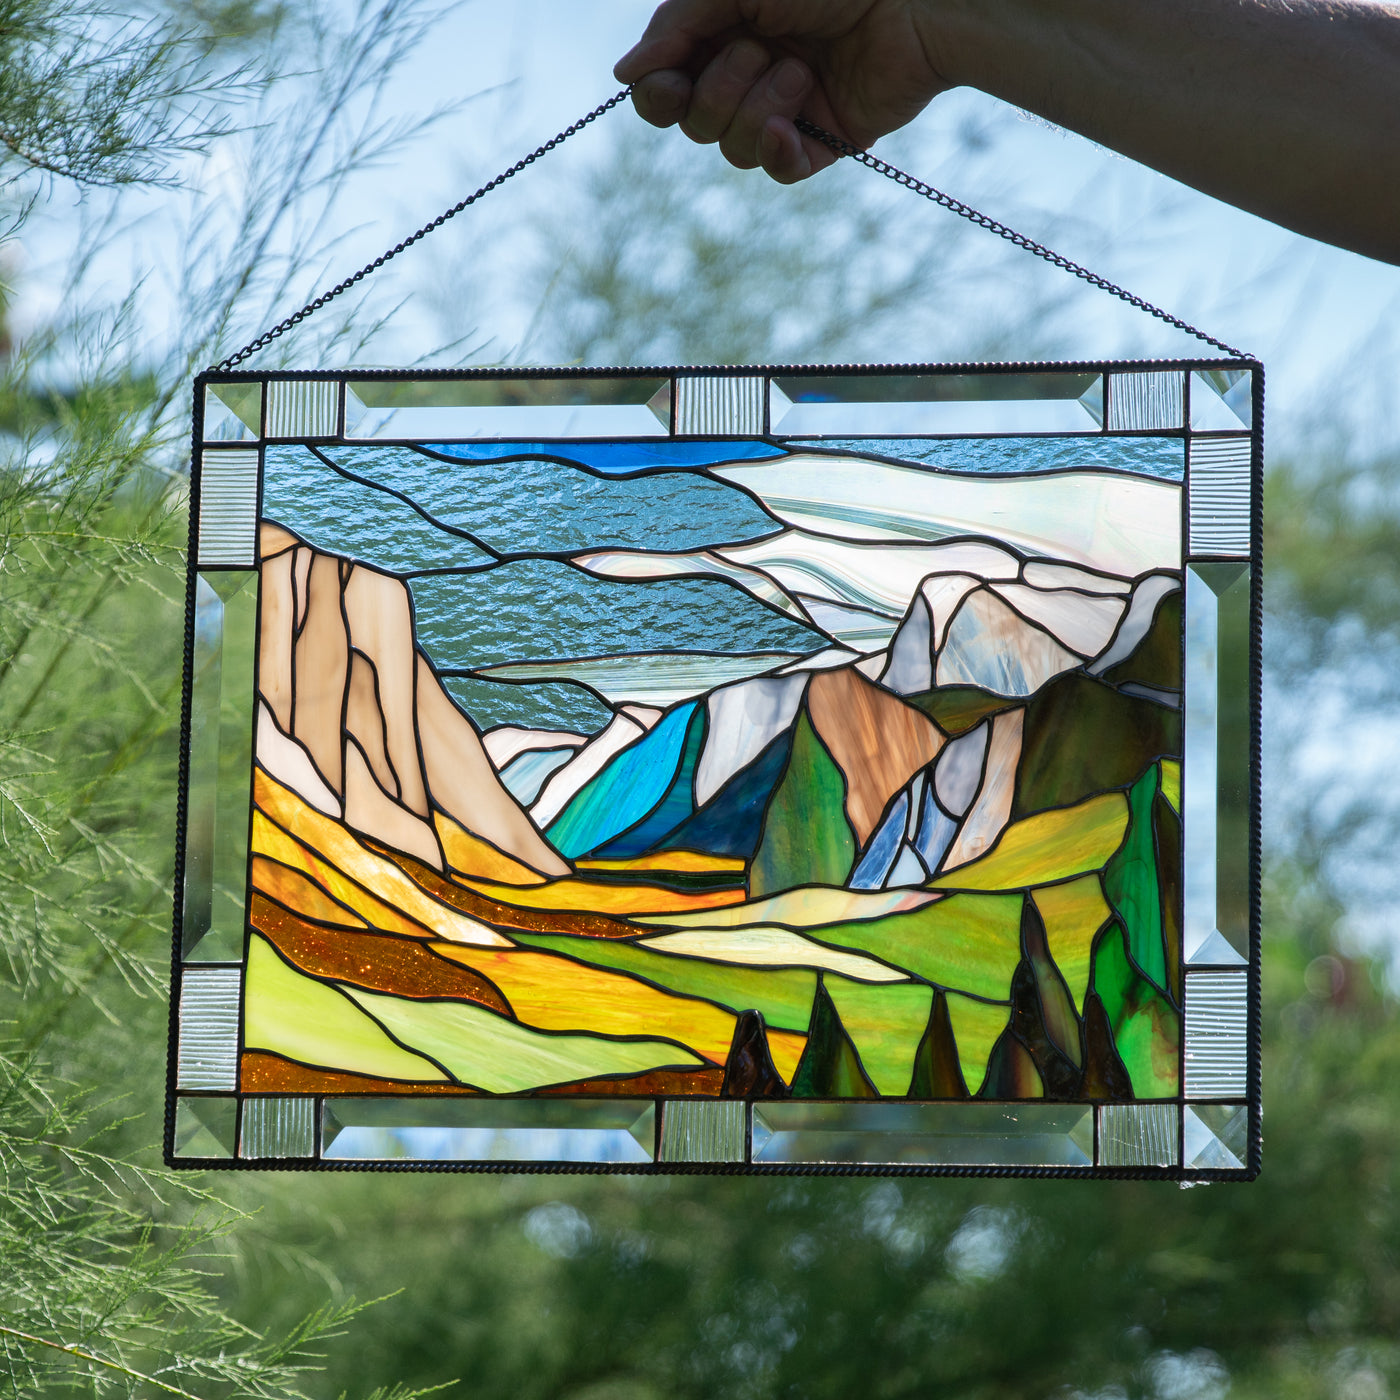 Stained glass window hanging depicting Yosemite national park